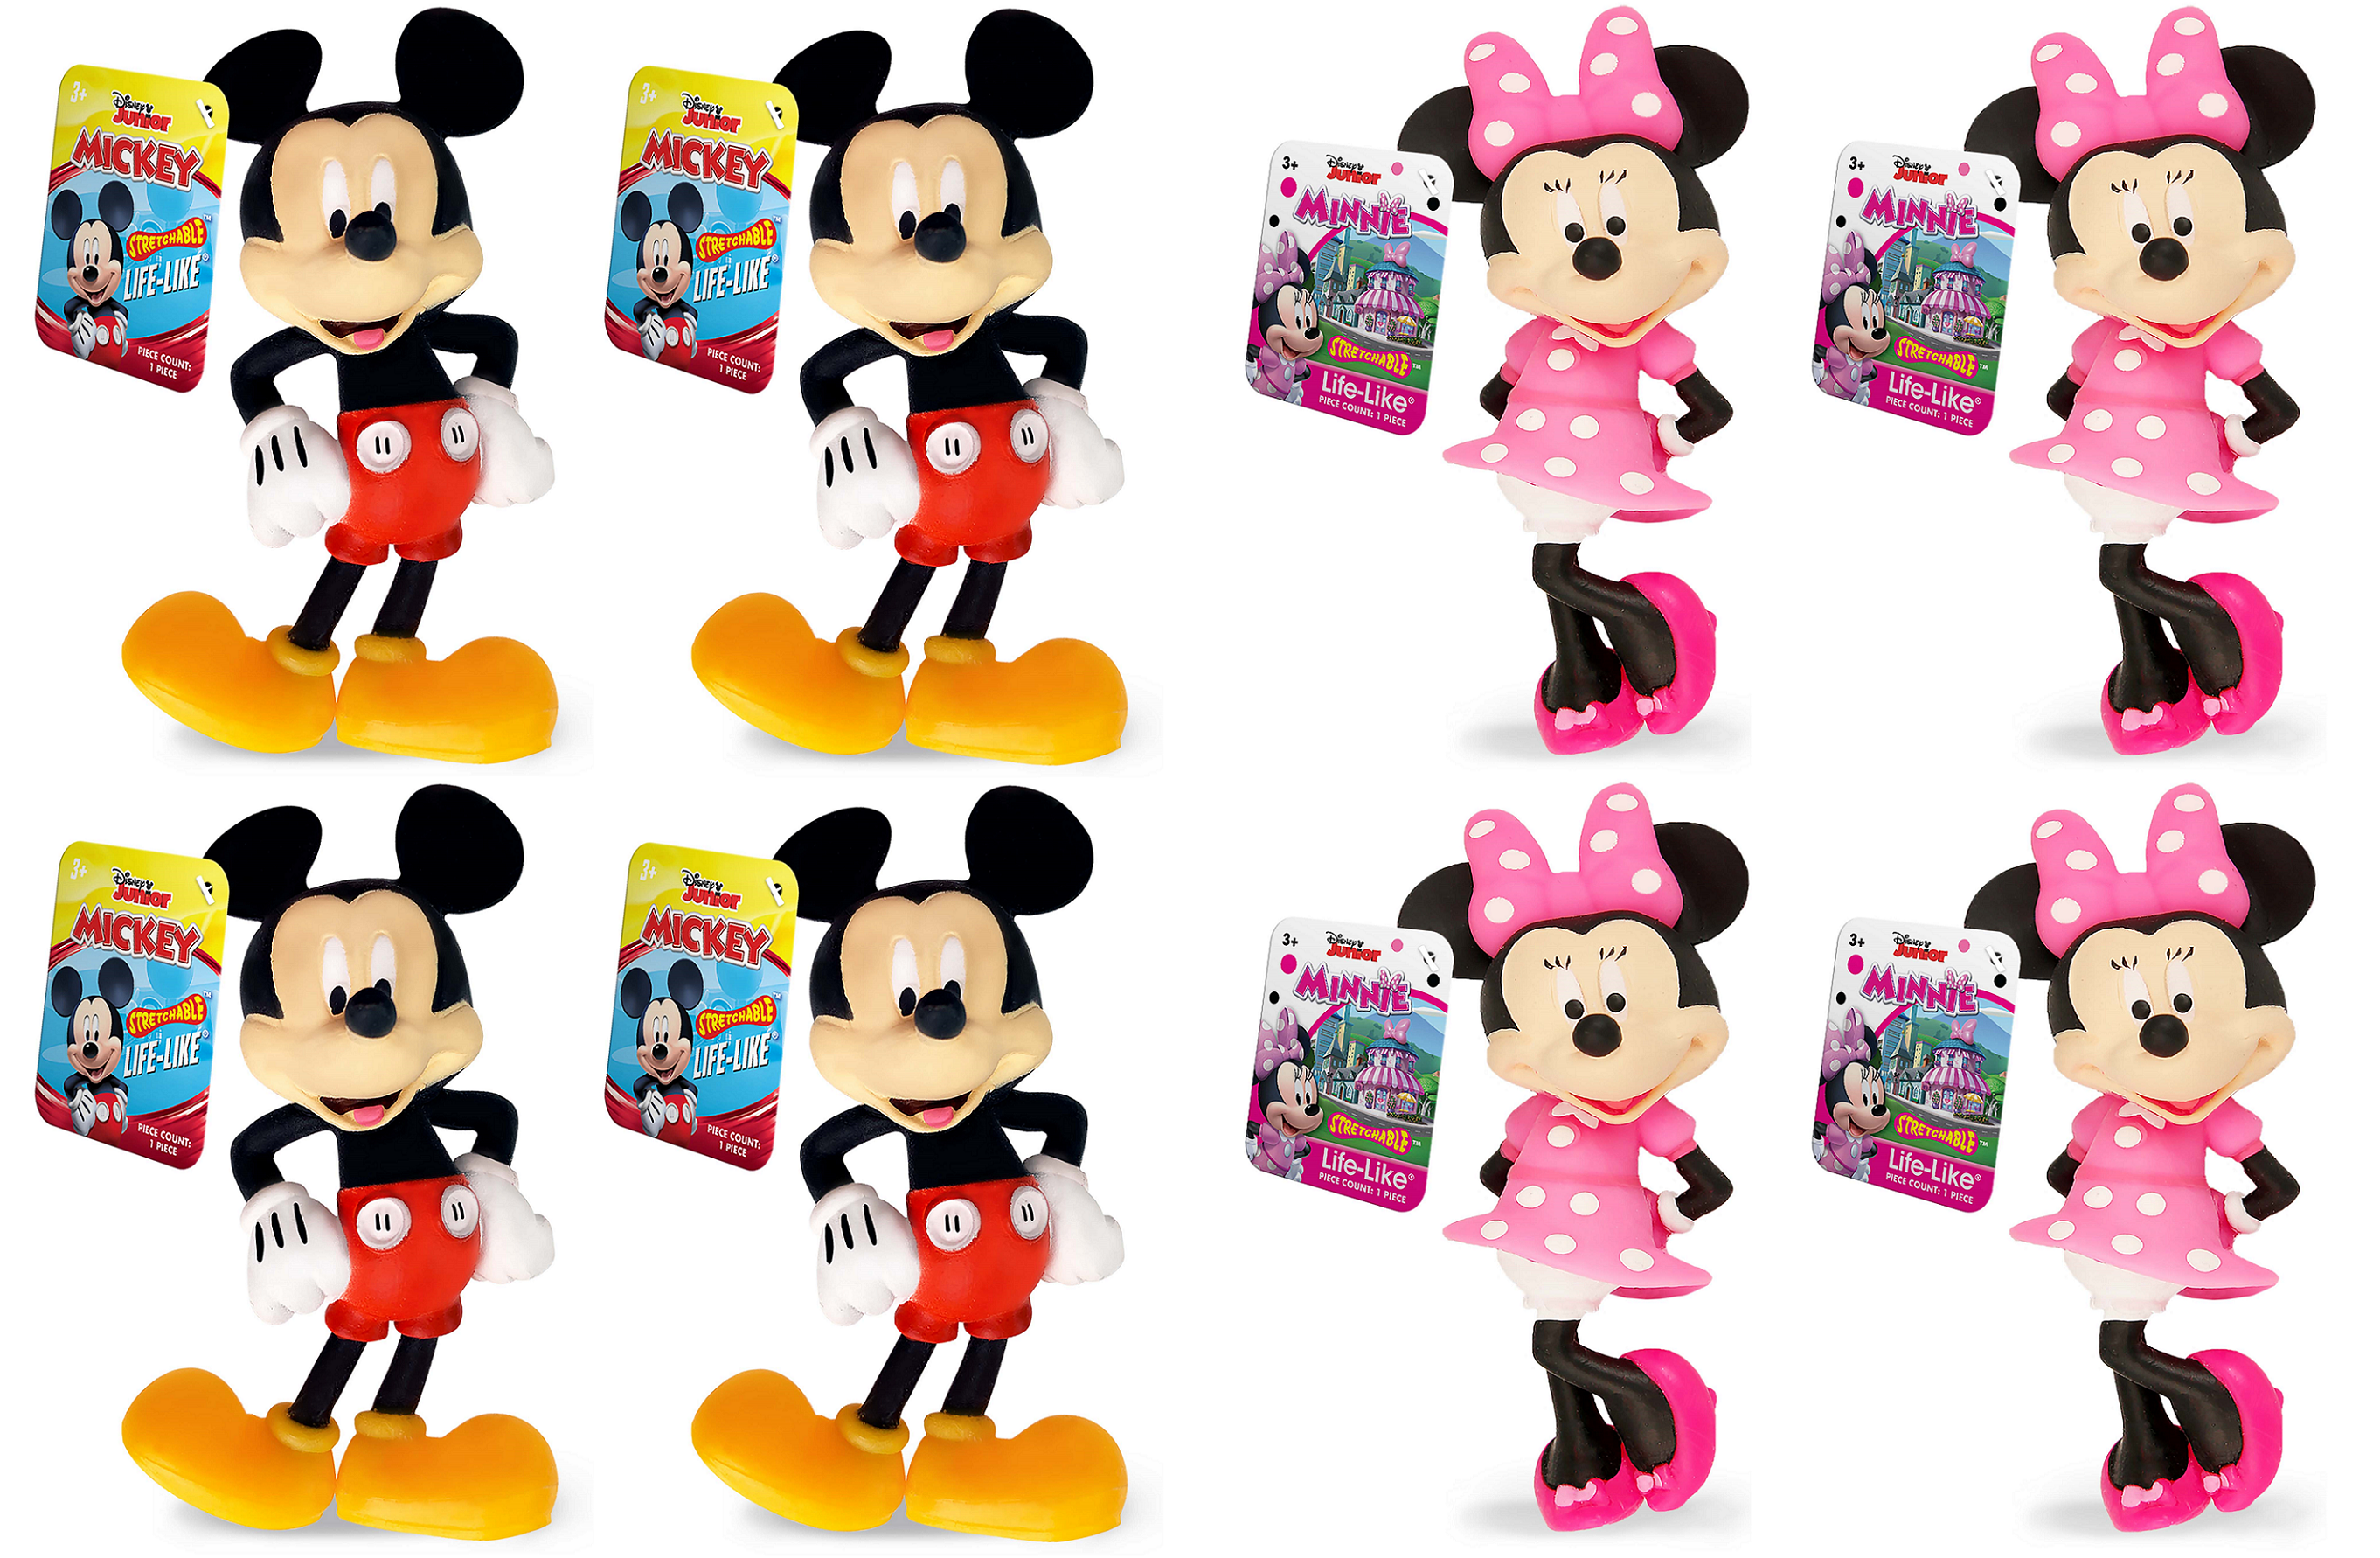 Disney Party Favors Mega Pack for Kids - Bundle with 3 Disney Squishy Ear Toy Sets with Mickey Ears Toys Plus Stickers, More | Disney Collectibles